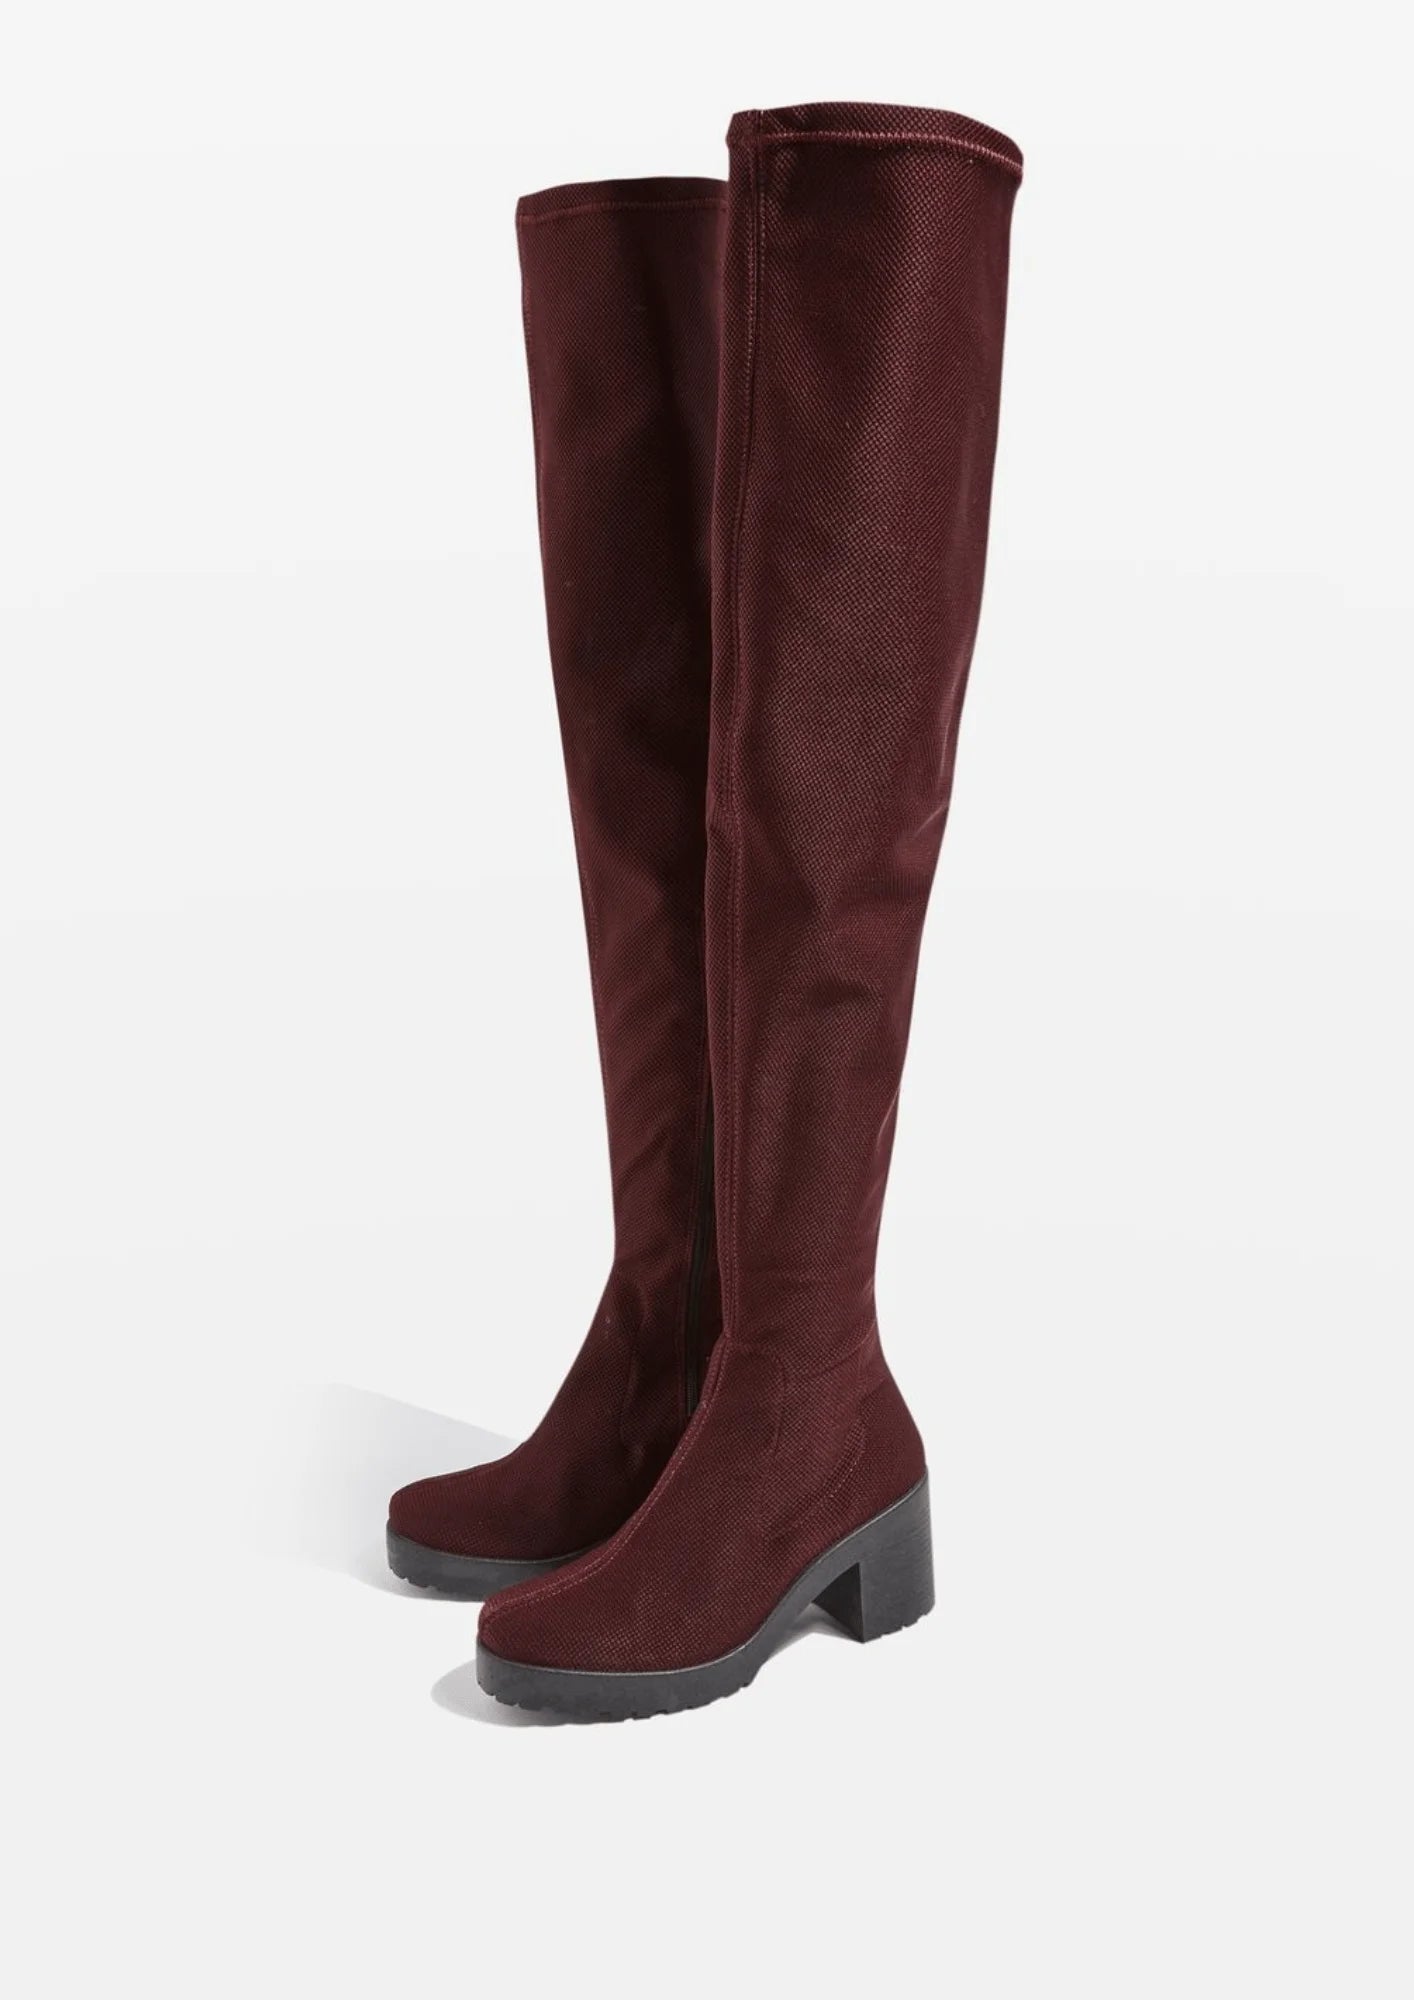 BURGUNDY OVER-THE-KNEE BOOTS